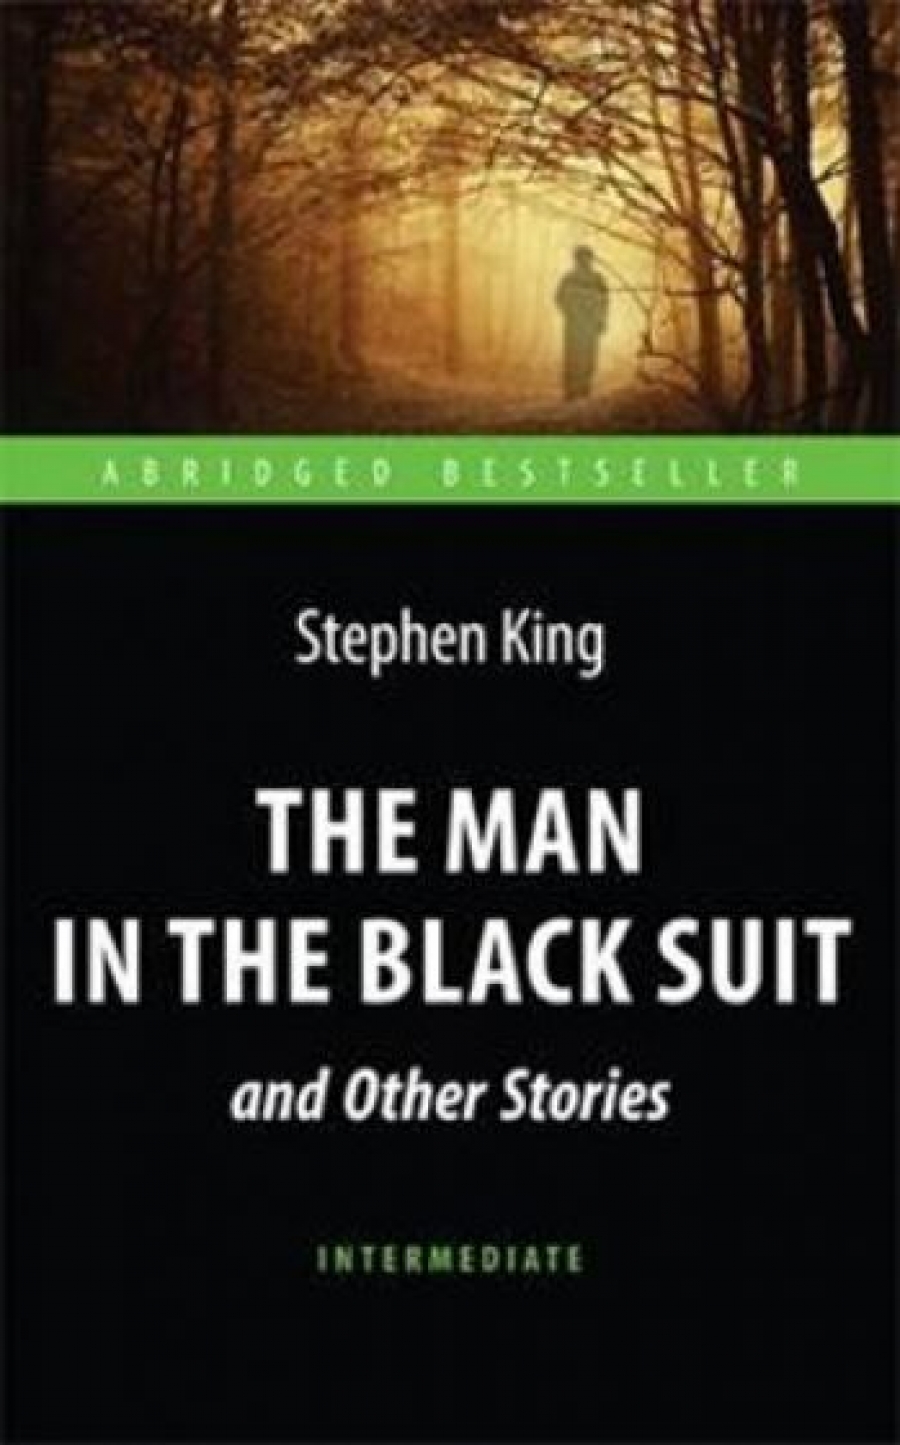   (King Stephen) .   .  .(The Man in the Black Suit and Other Stories)../. .. 